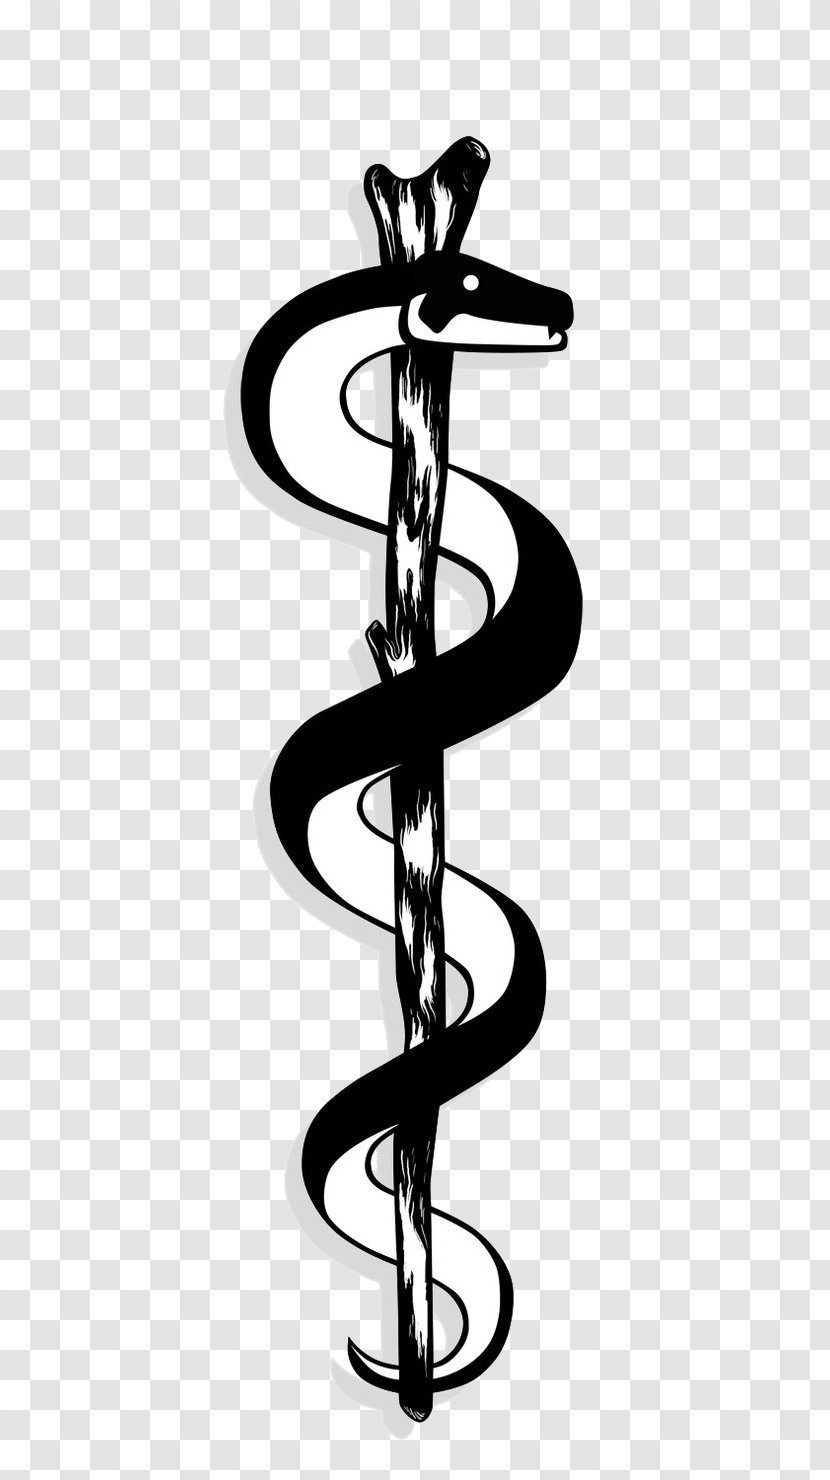 Apollo Rod Of Asclepius Staff Hermes Caduceus As A Symbol Medicine - Black And White Transparent PNG